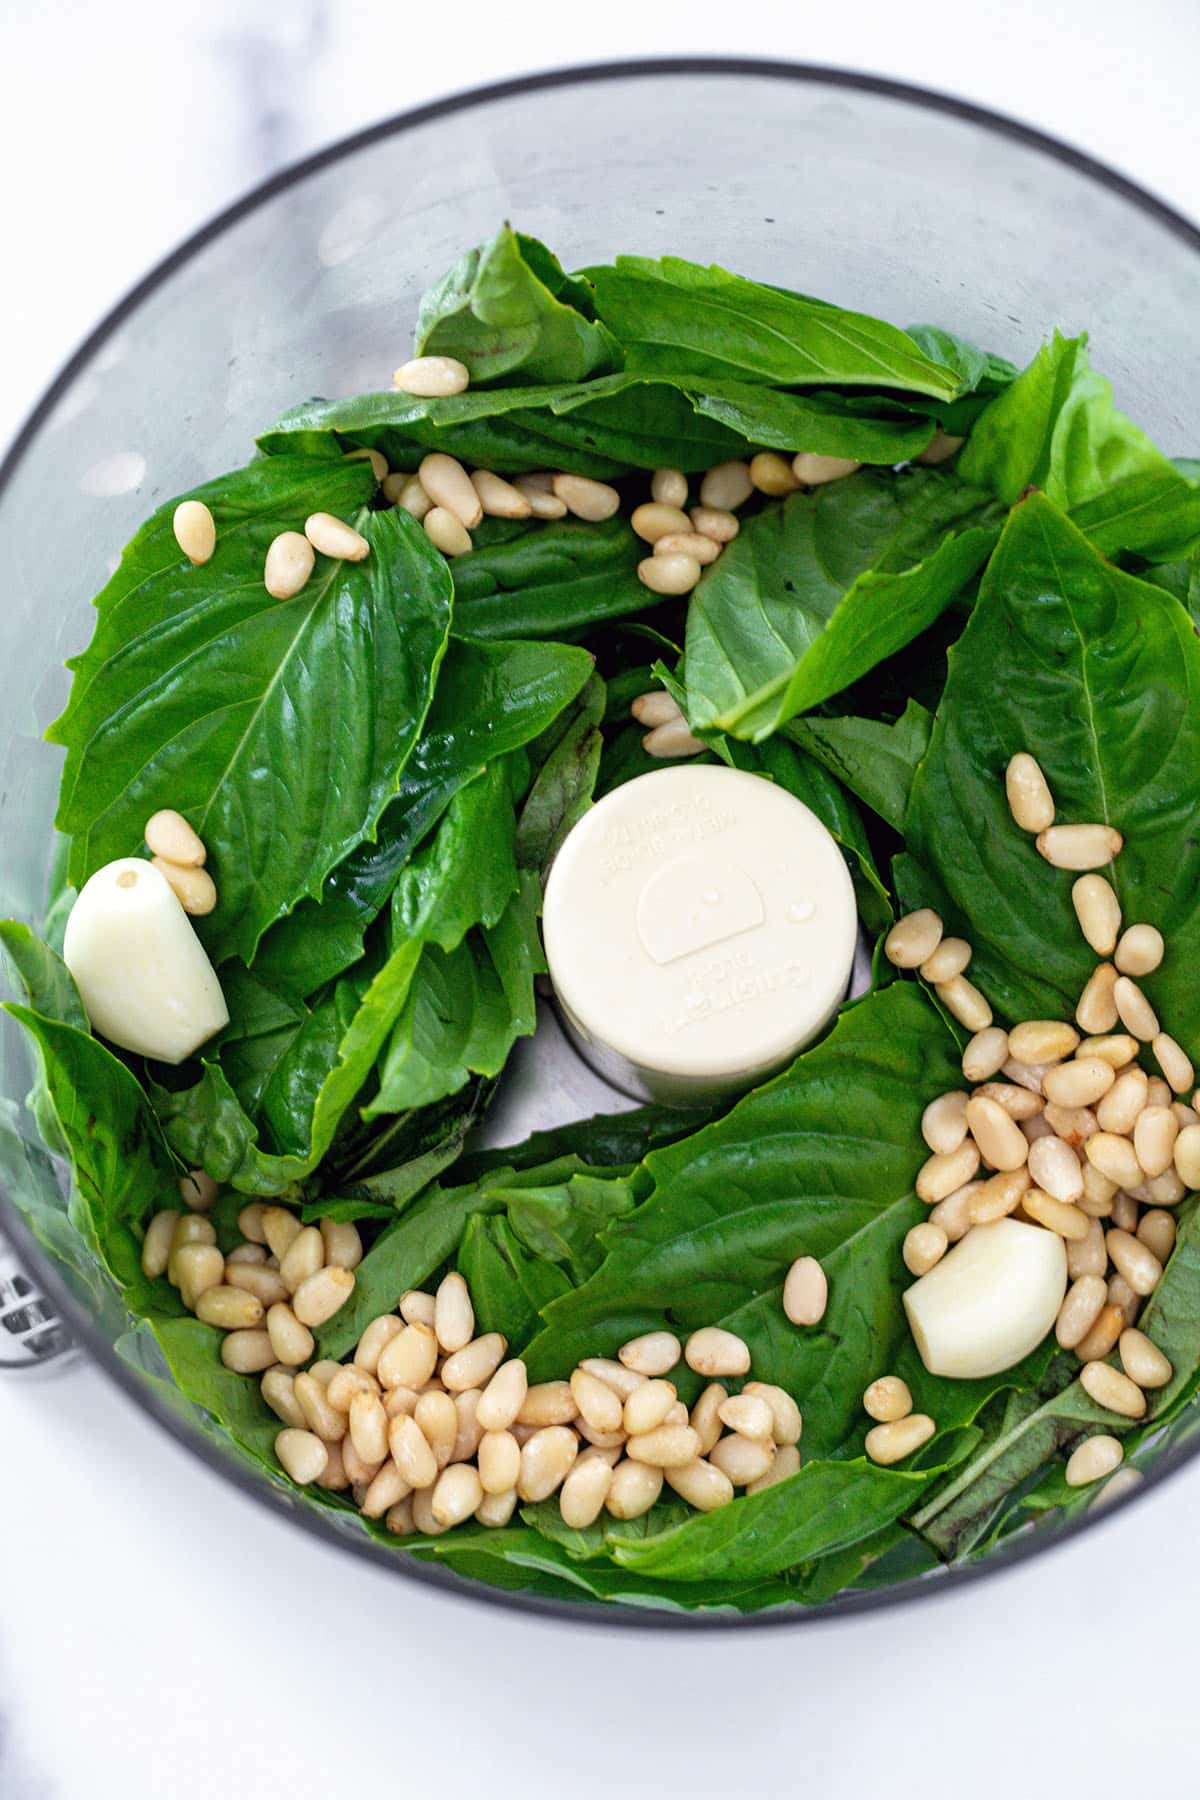 Fresh basil, pine nuts, and garlic cloves in food processor bowl.